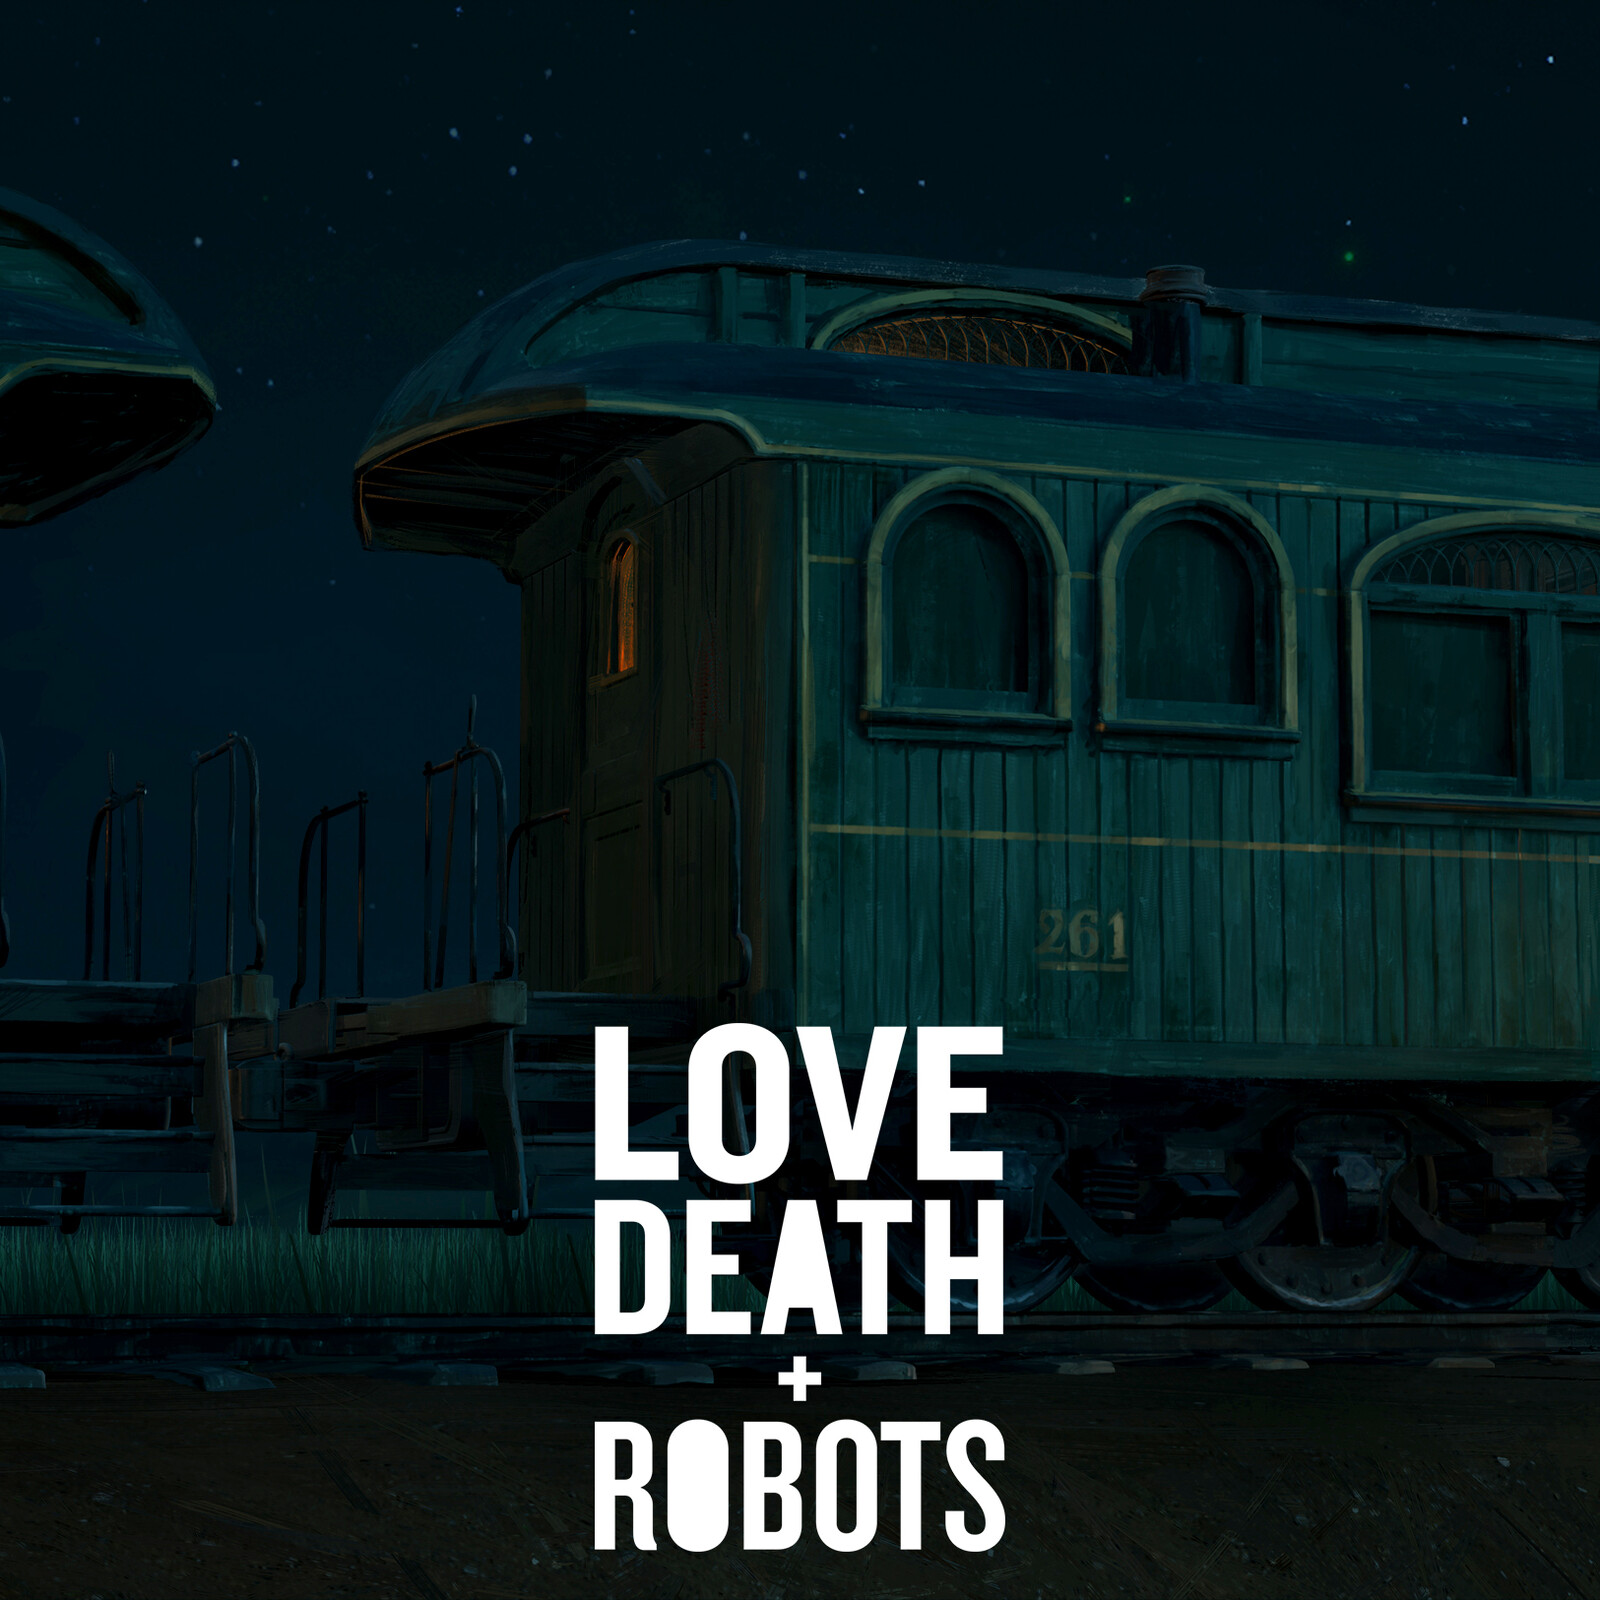  Love, Death + Robots - The Tall Grass, Matte Painting Lead